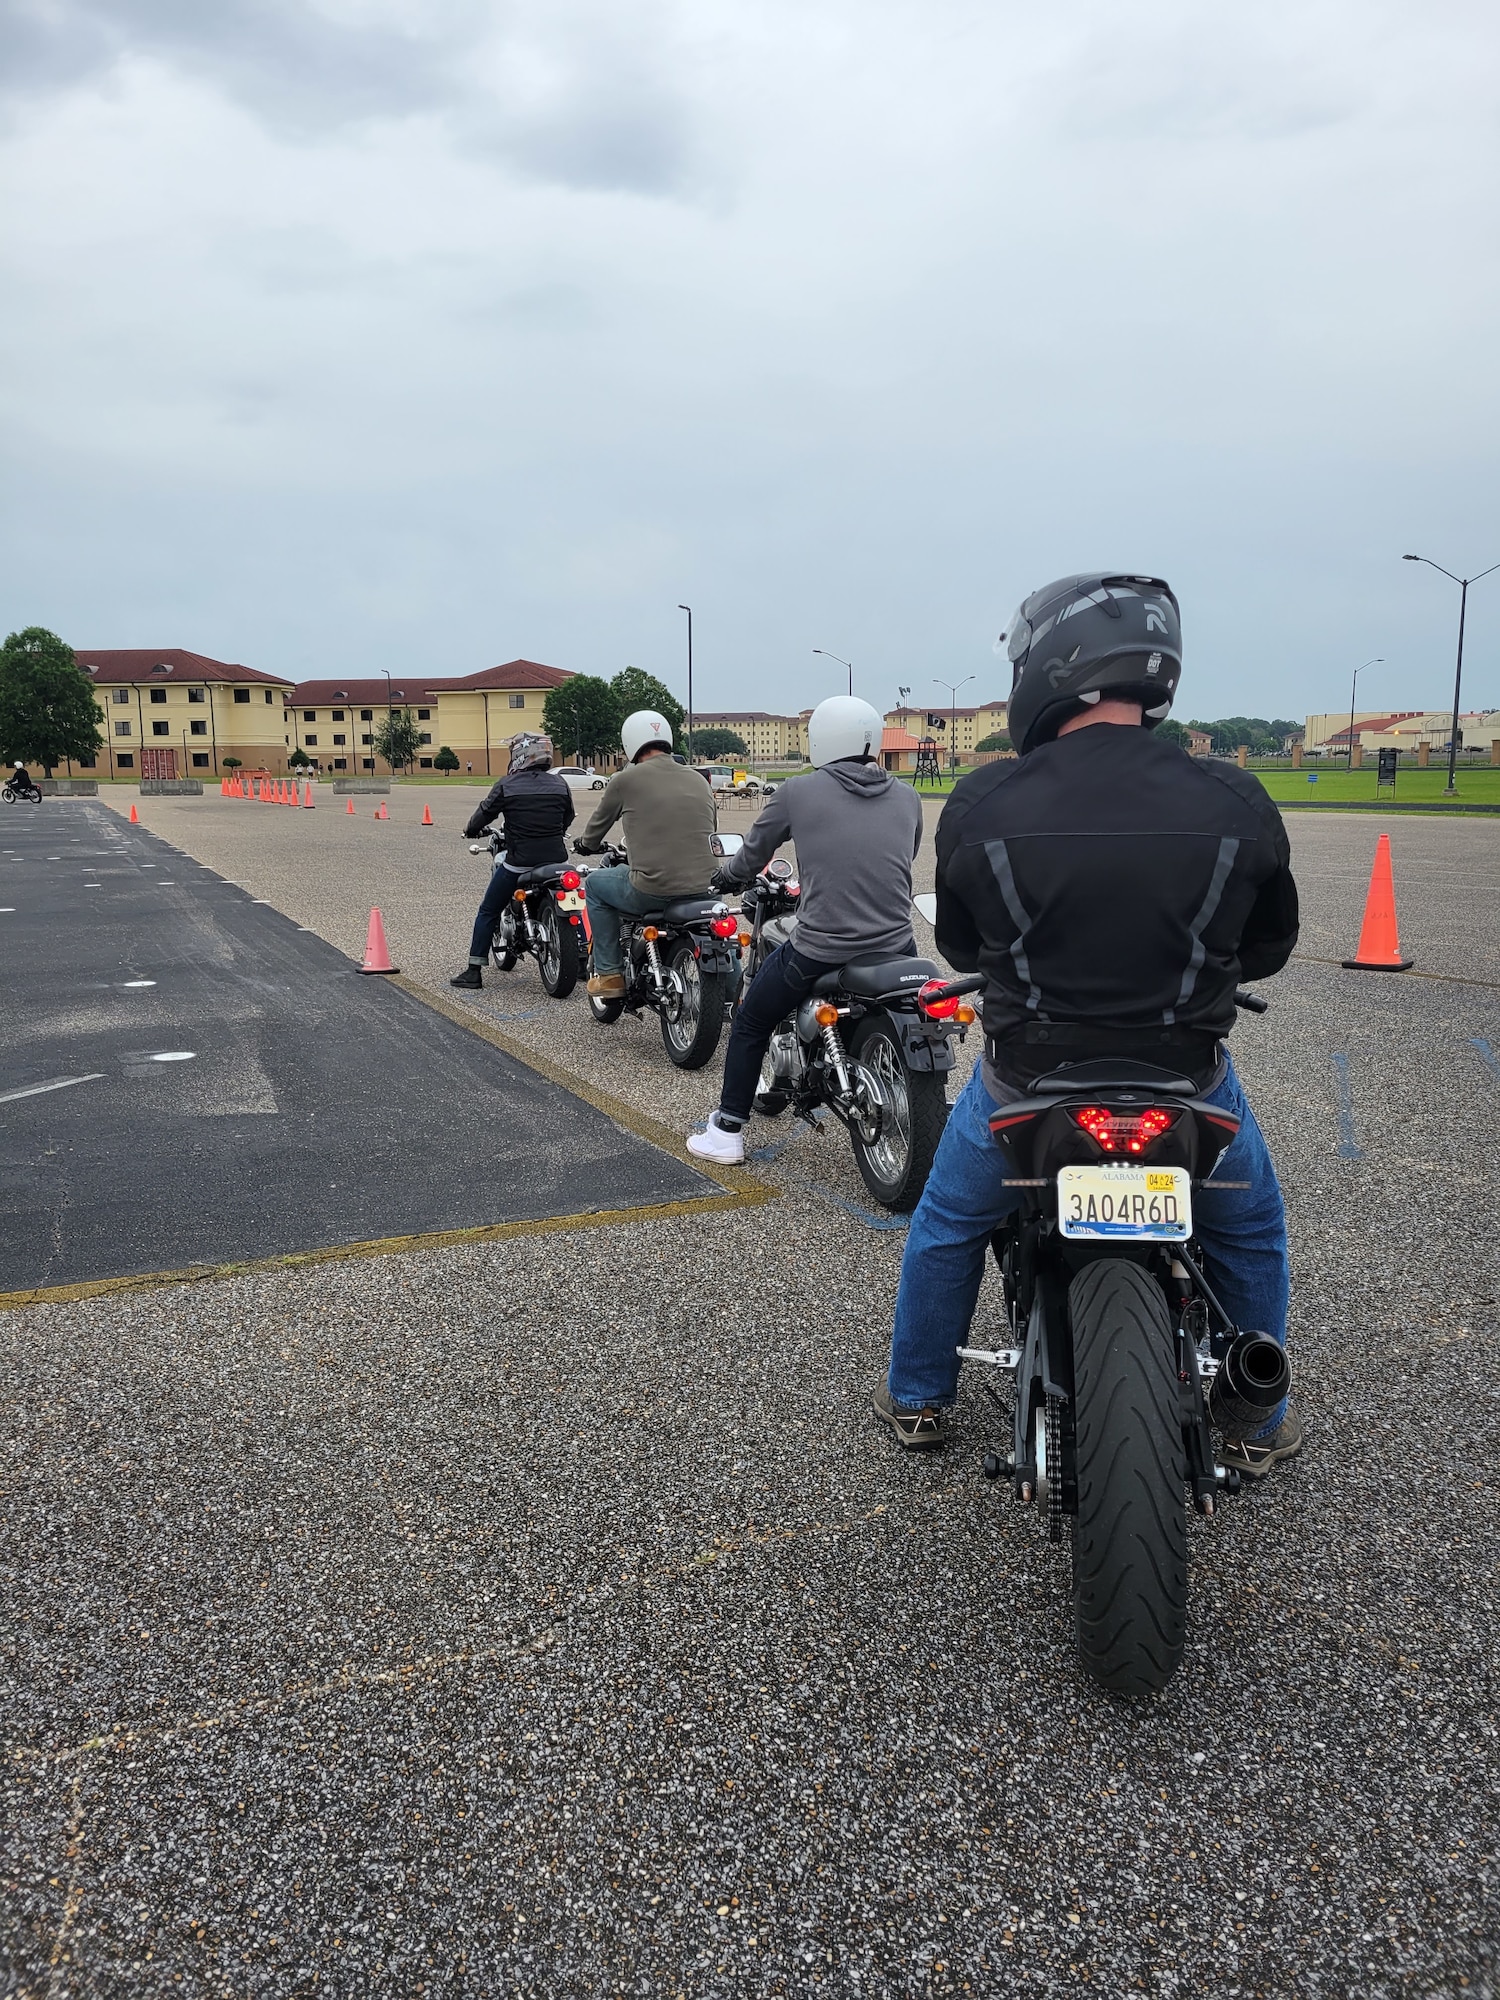 May is Motorcycle Safety Month, and the installation is reflecting on recent losses due to private motor vehicle accidents. One strategy to consider is the Search, Evaluate and Execute strategy which can help both motorcyclists and motorists avoid accidents that can result in fatalities.